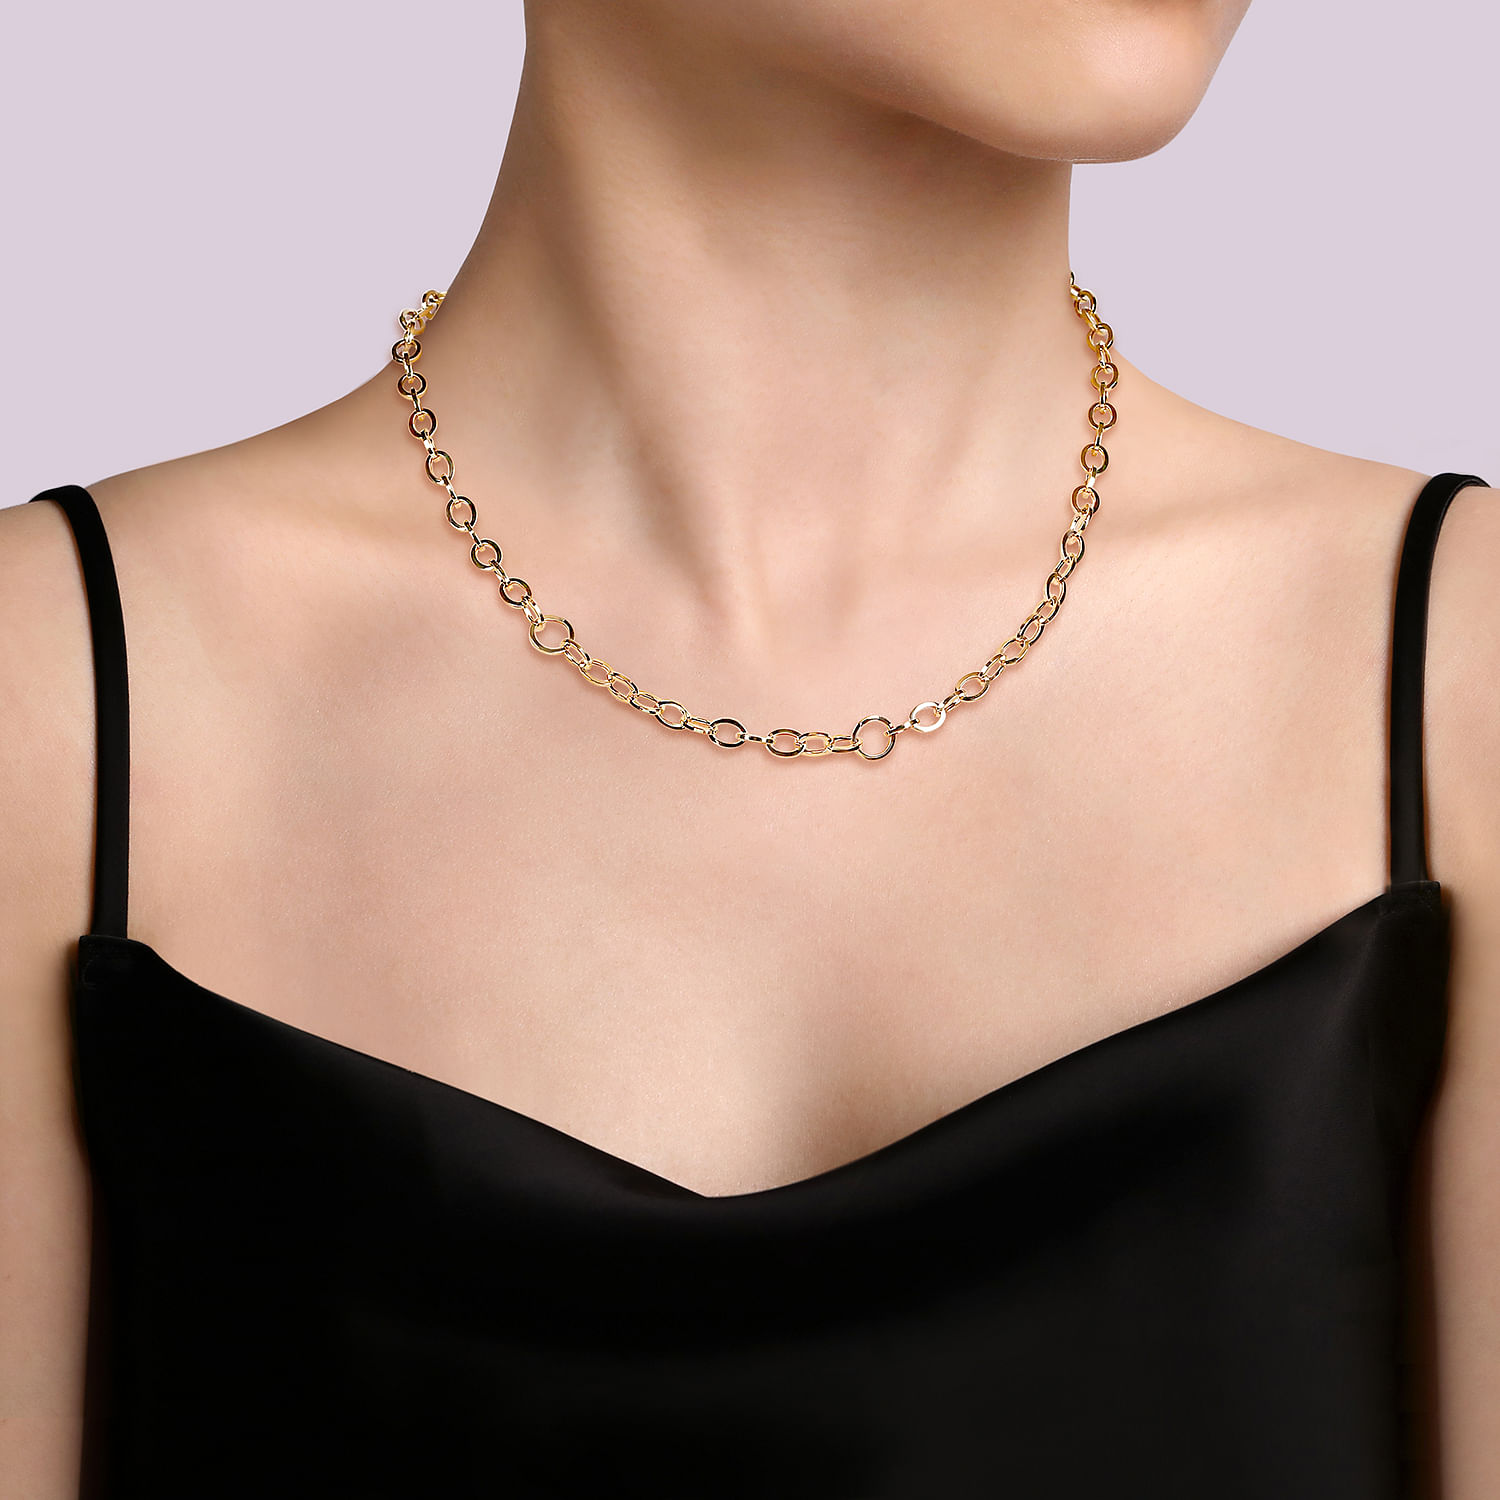 14K Yellow Gold Link Chain Necklace